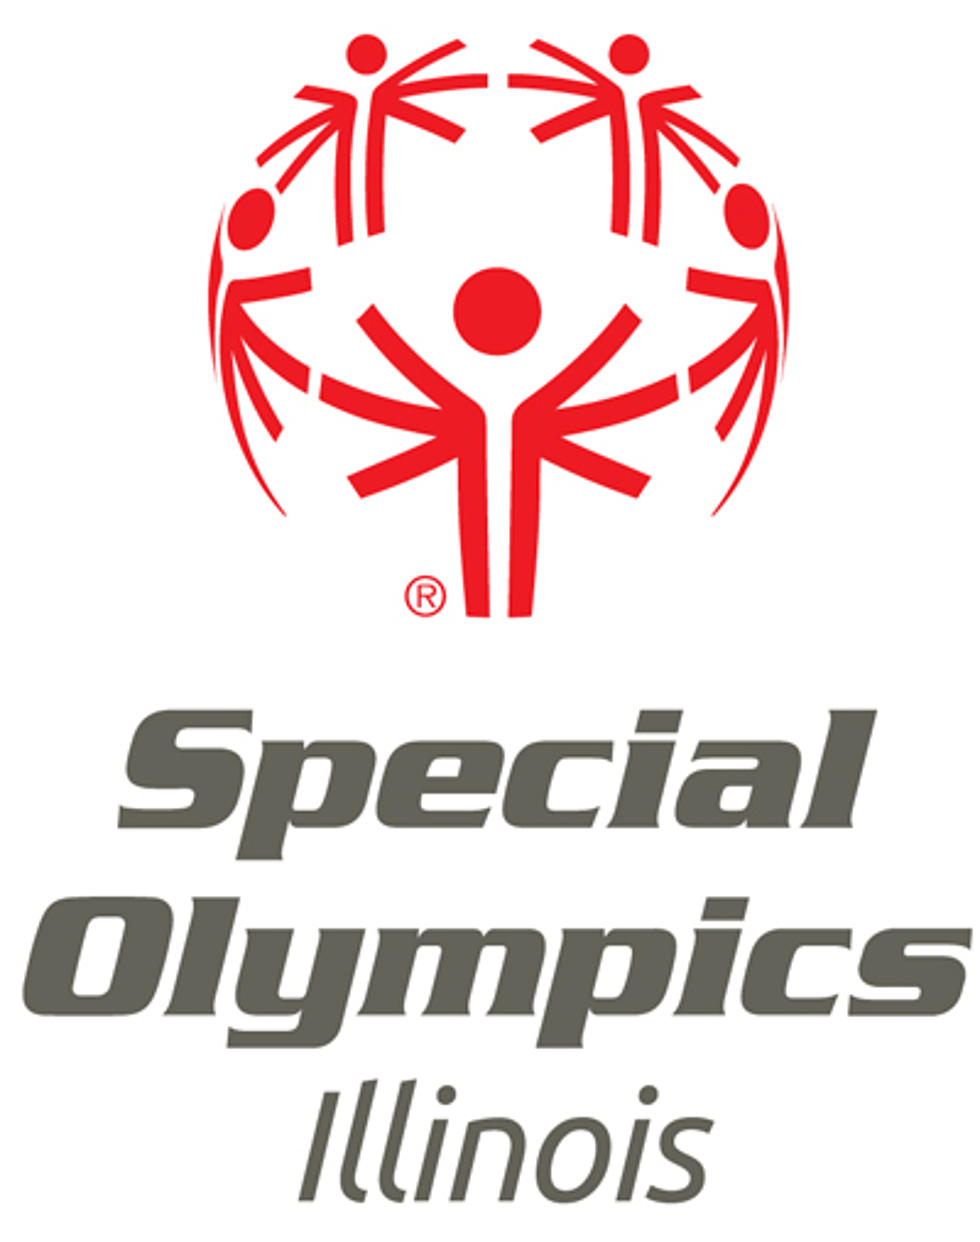 Rockford Athlete Wins Gold in Special Olympics World Games